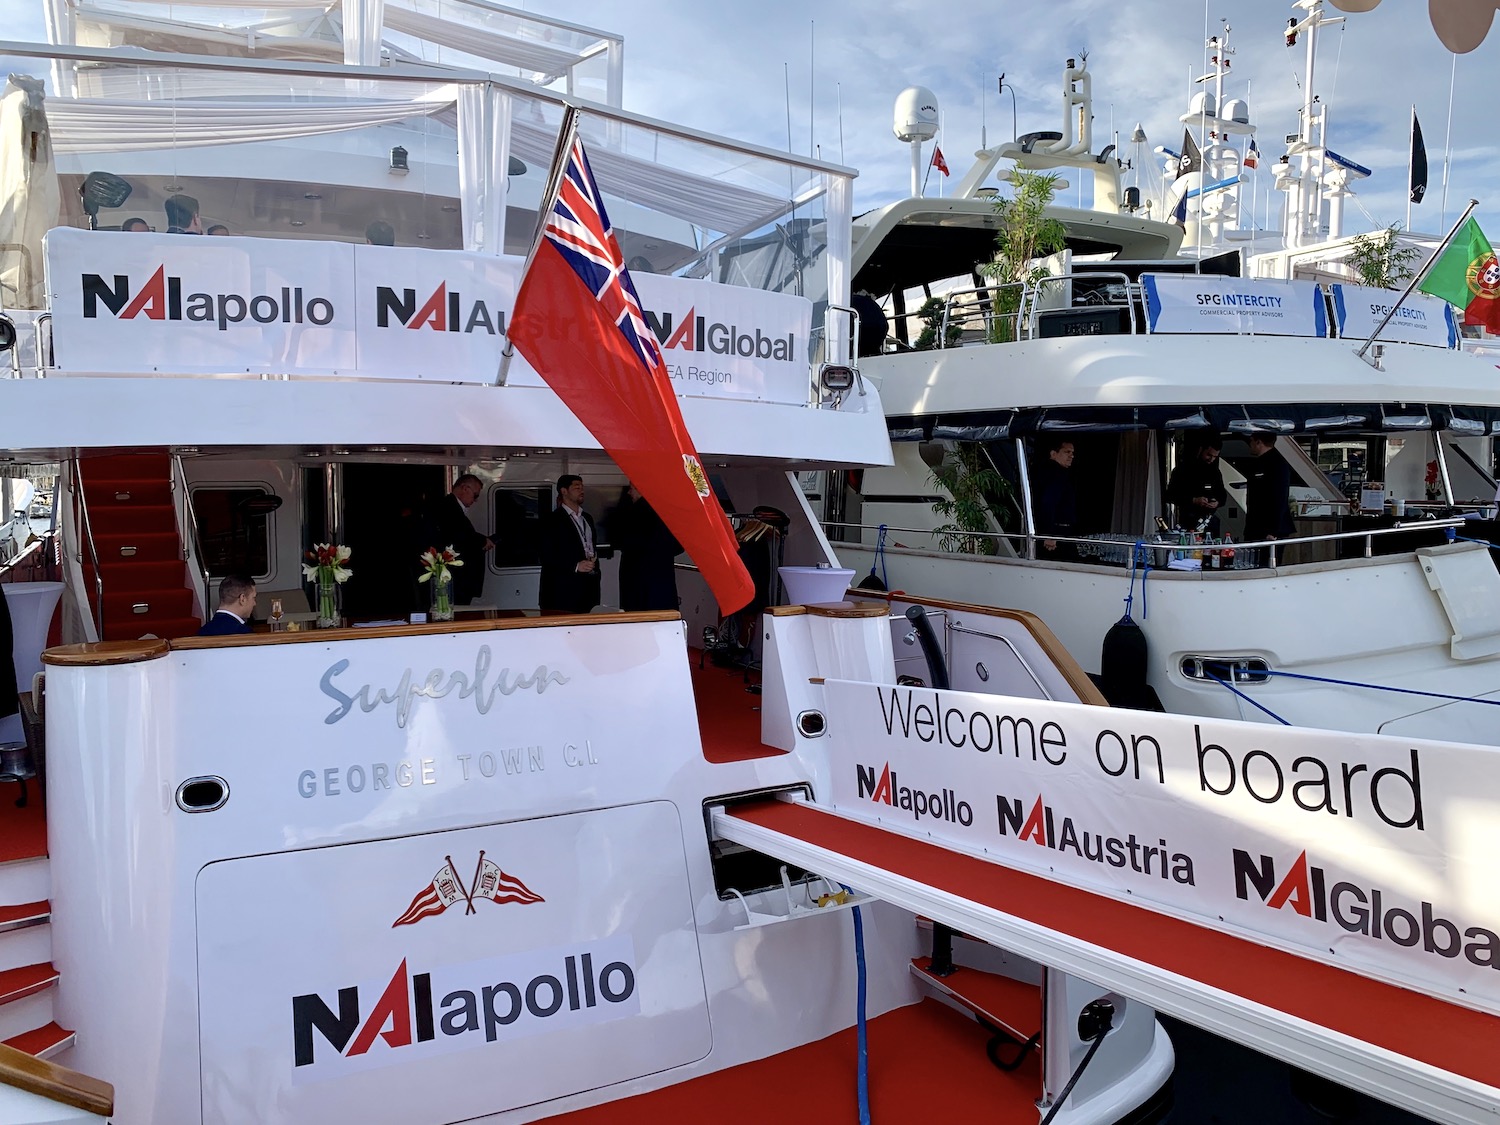 NAI yacht at MIPIM in Cannes, France